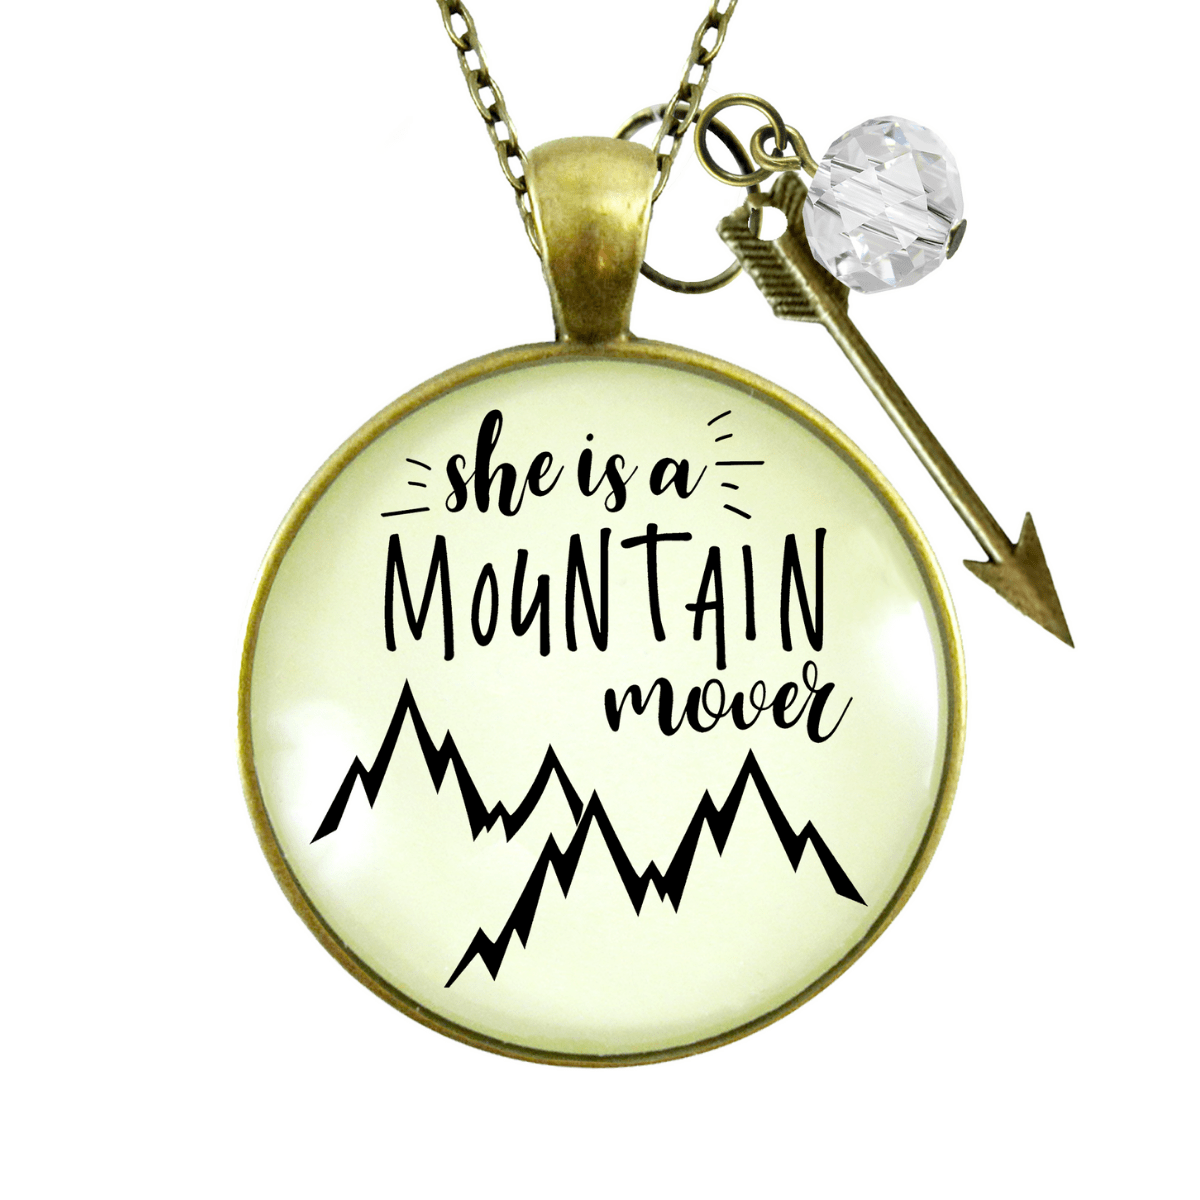 Gutsy Goodness She is a Mountain Mover Necklace Motivated Life Attitude Jewelry - Gutsy Goodness Handmade Jewelry;She Is A Mountain Mover Necklace Motivated Life Attitude Jewelry - Gutsy Goodness Handmade Jewelry Gifts